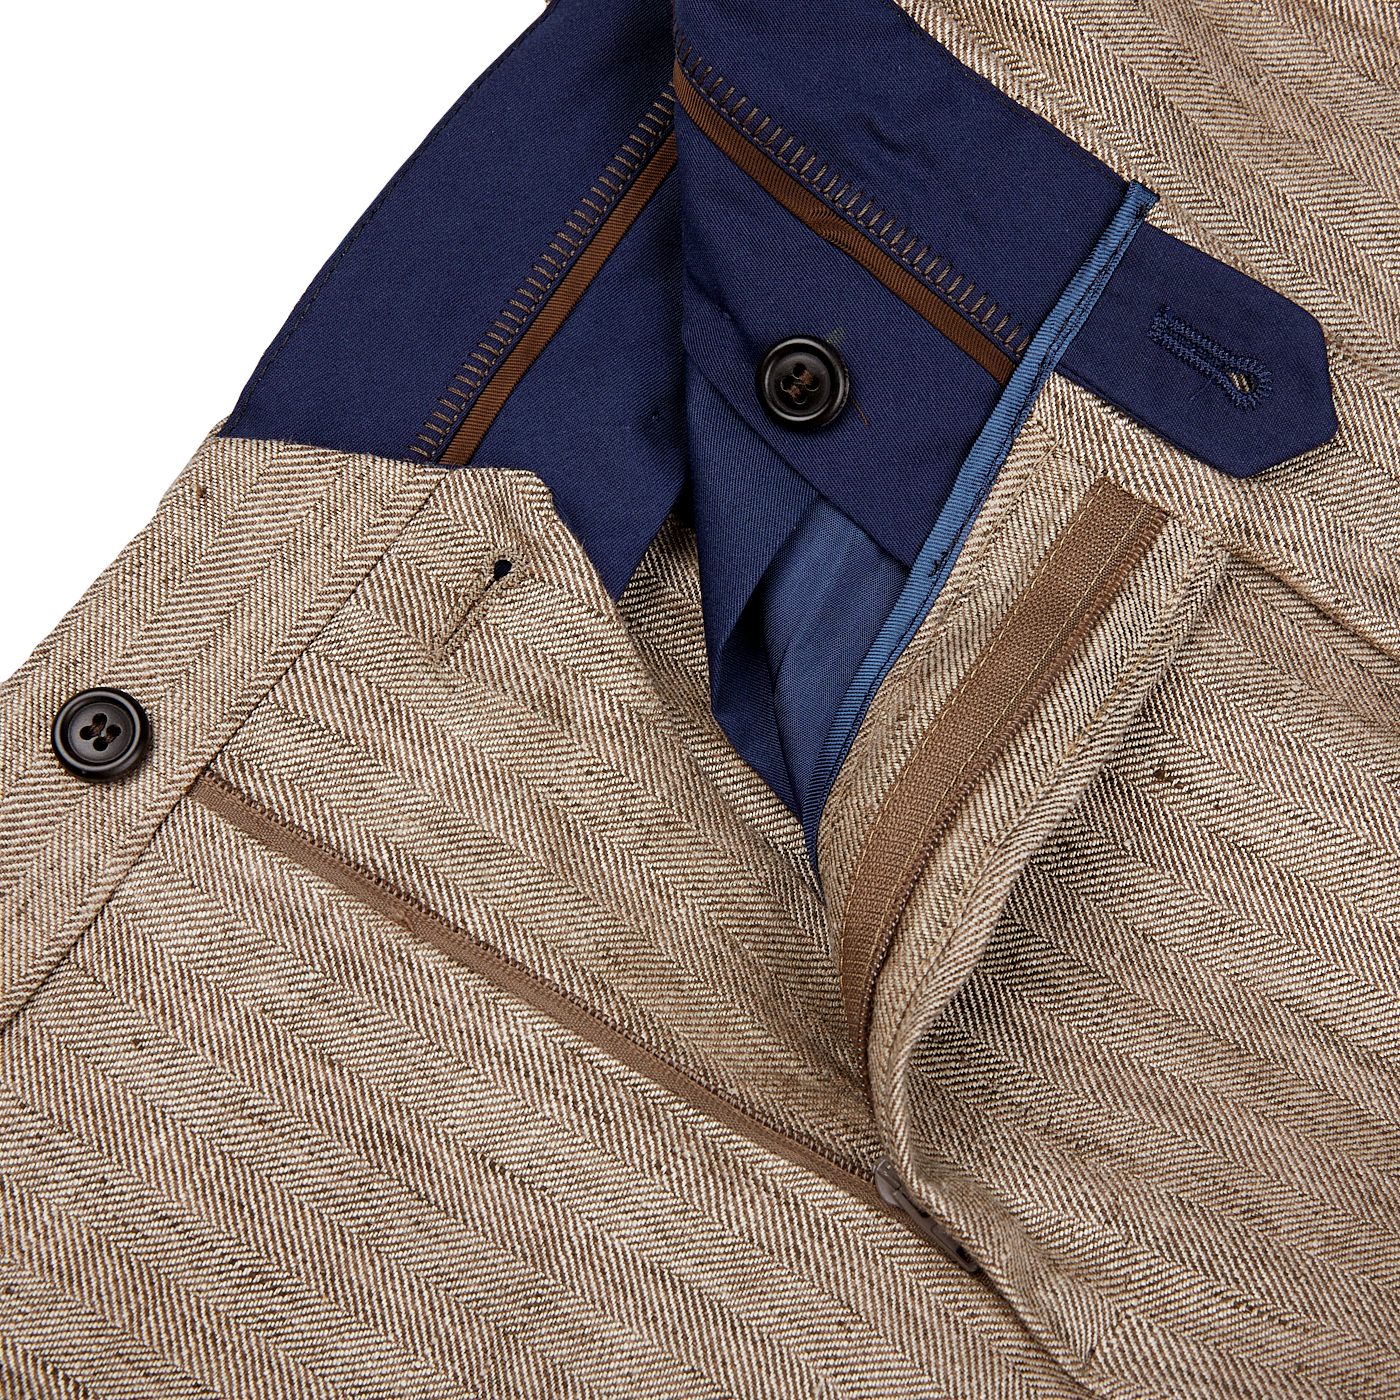 A close up of a Light Brown Herringbone Linen Suit with blue buttons, expertly tailored from pure linen by Luigi Bianchi.